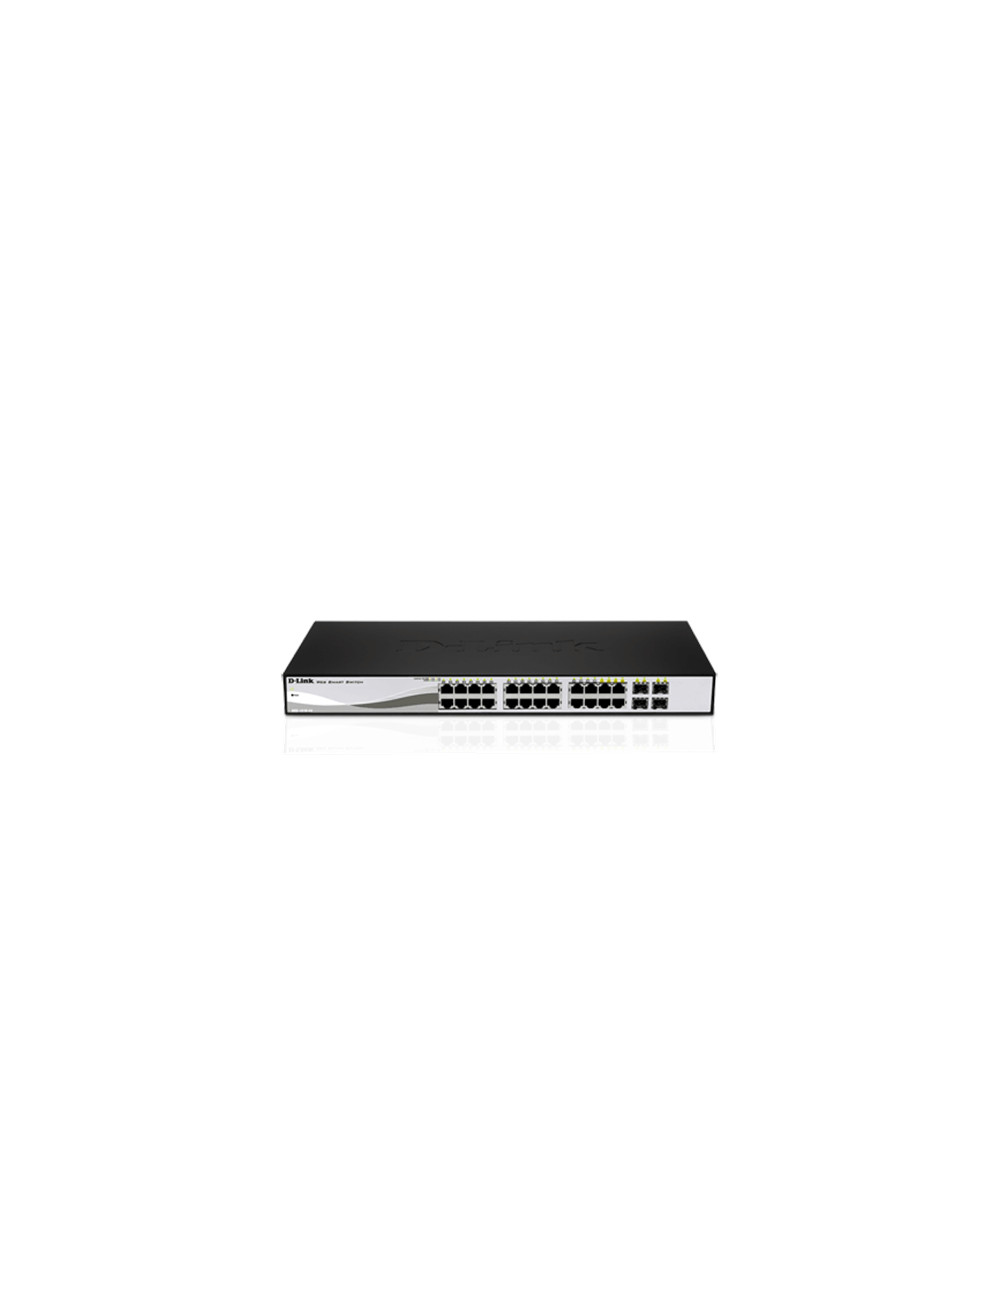 D-LINK DGS-1210-20, Gigabit Smart Switch with 16 10/100/1000Base-T ports and 4 Gigabit MiniGBIC (SFP) ports, 802.3x Flow Control